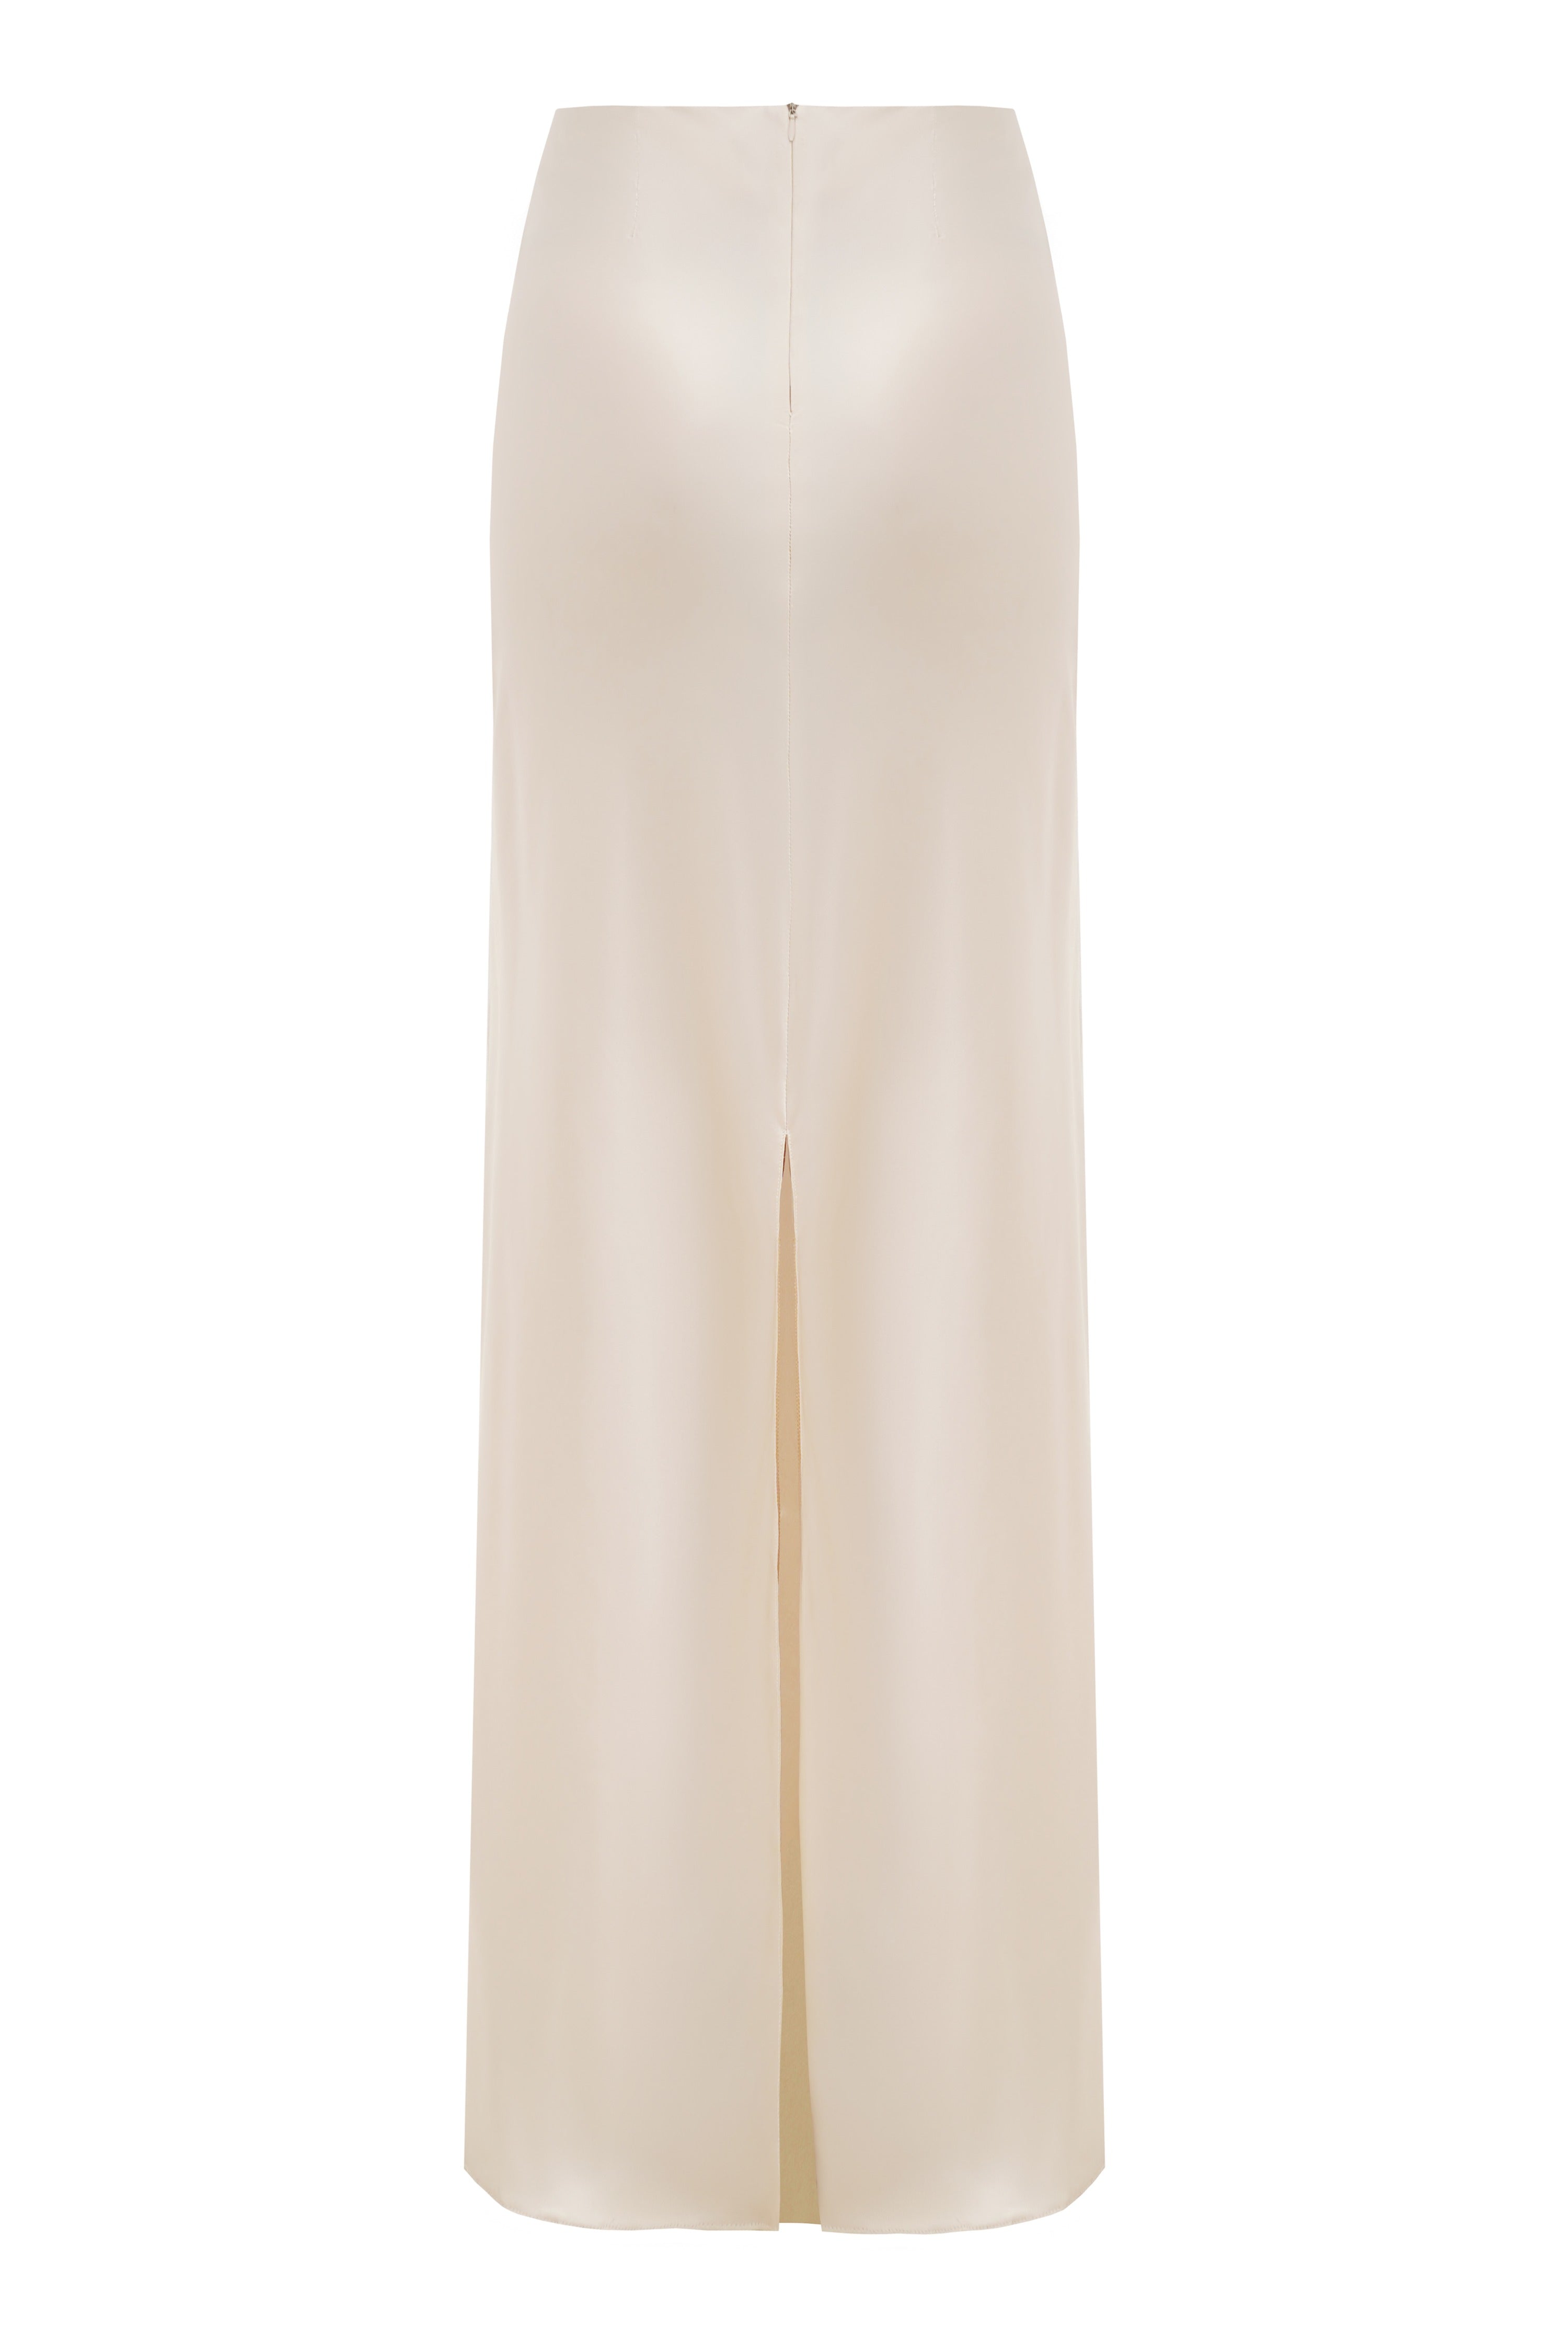 100% silk sustainable maxi skirt with a back slit and a back zipper